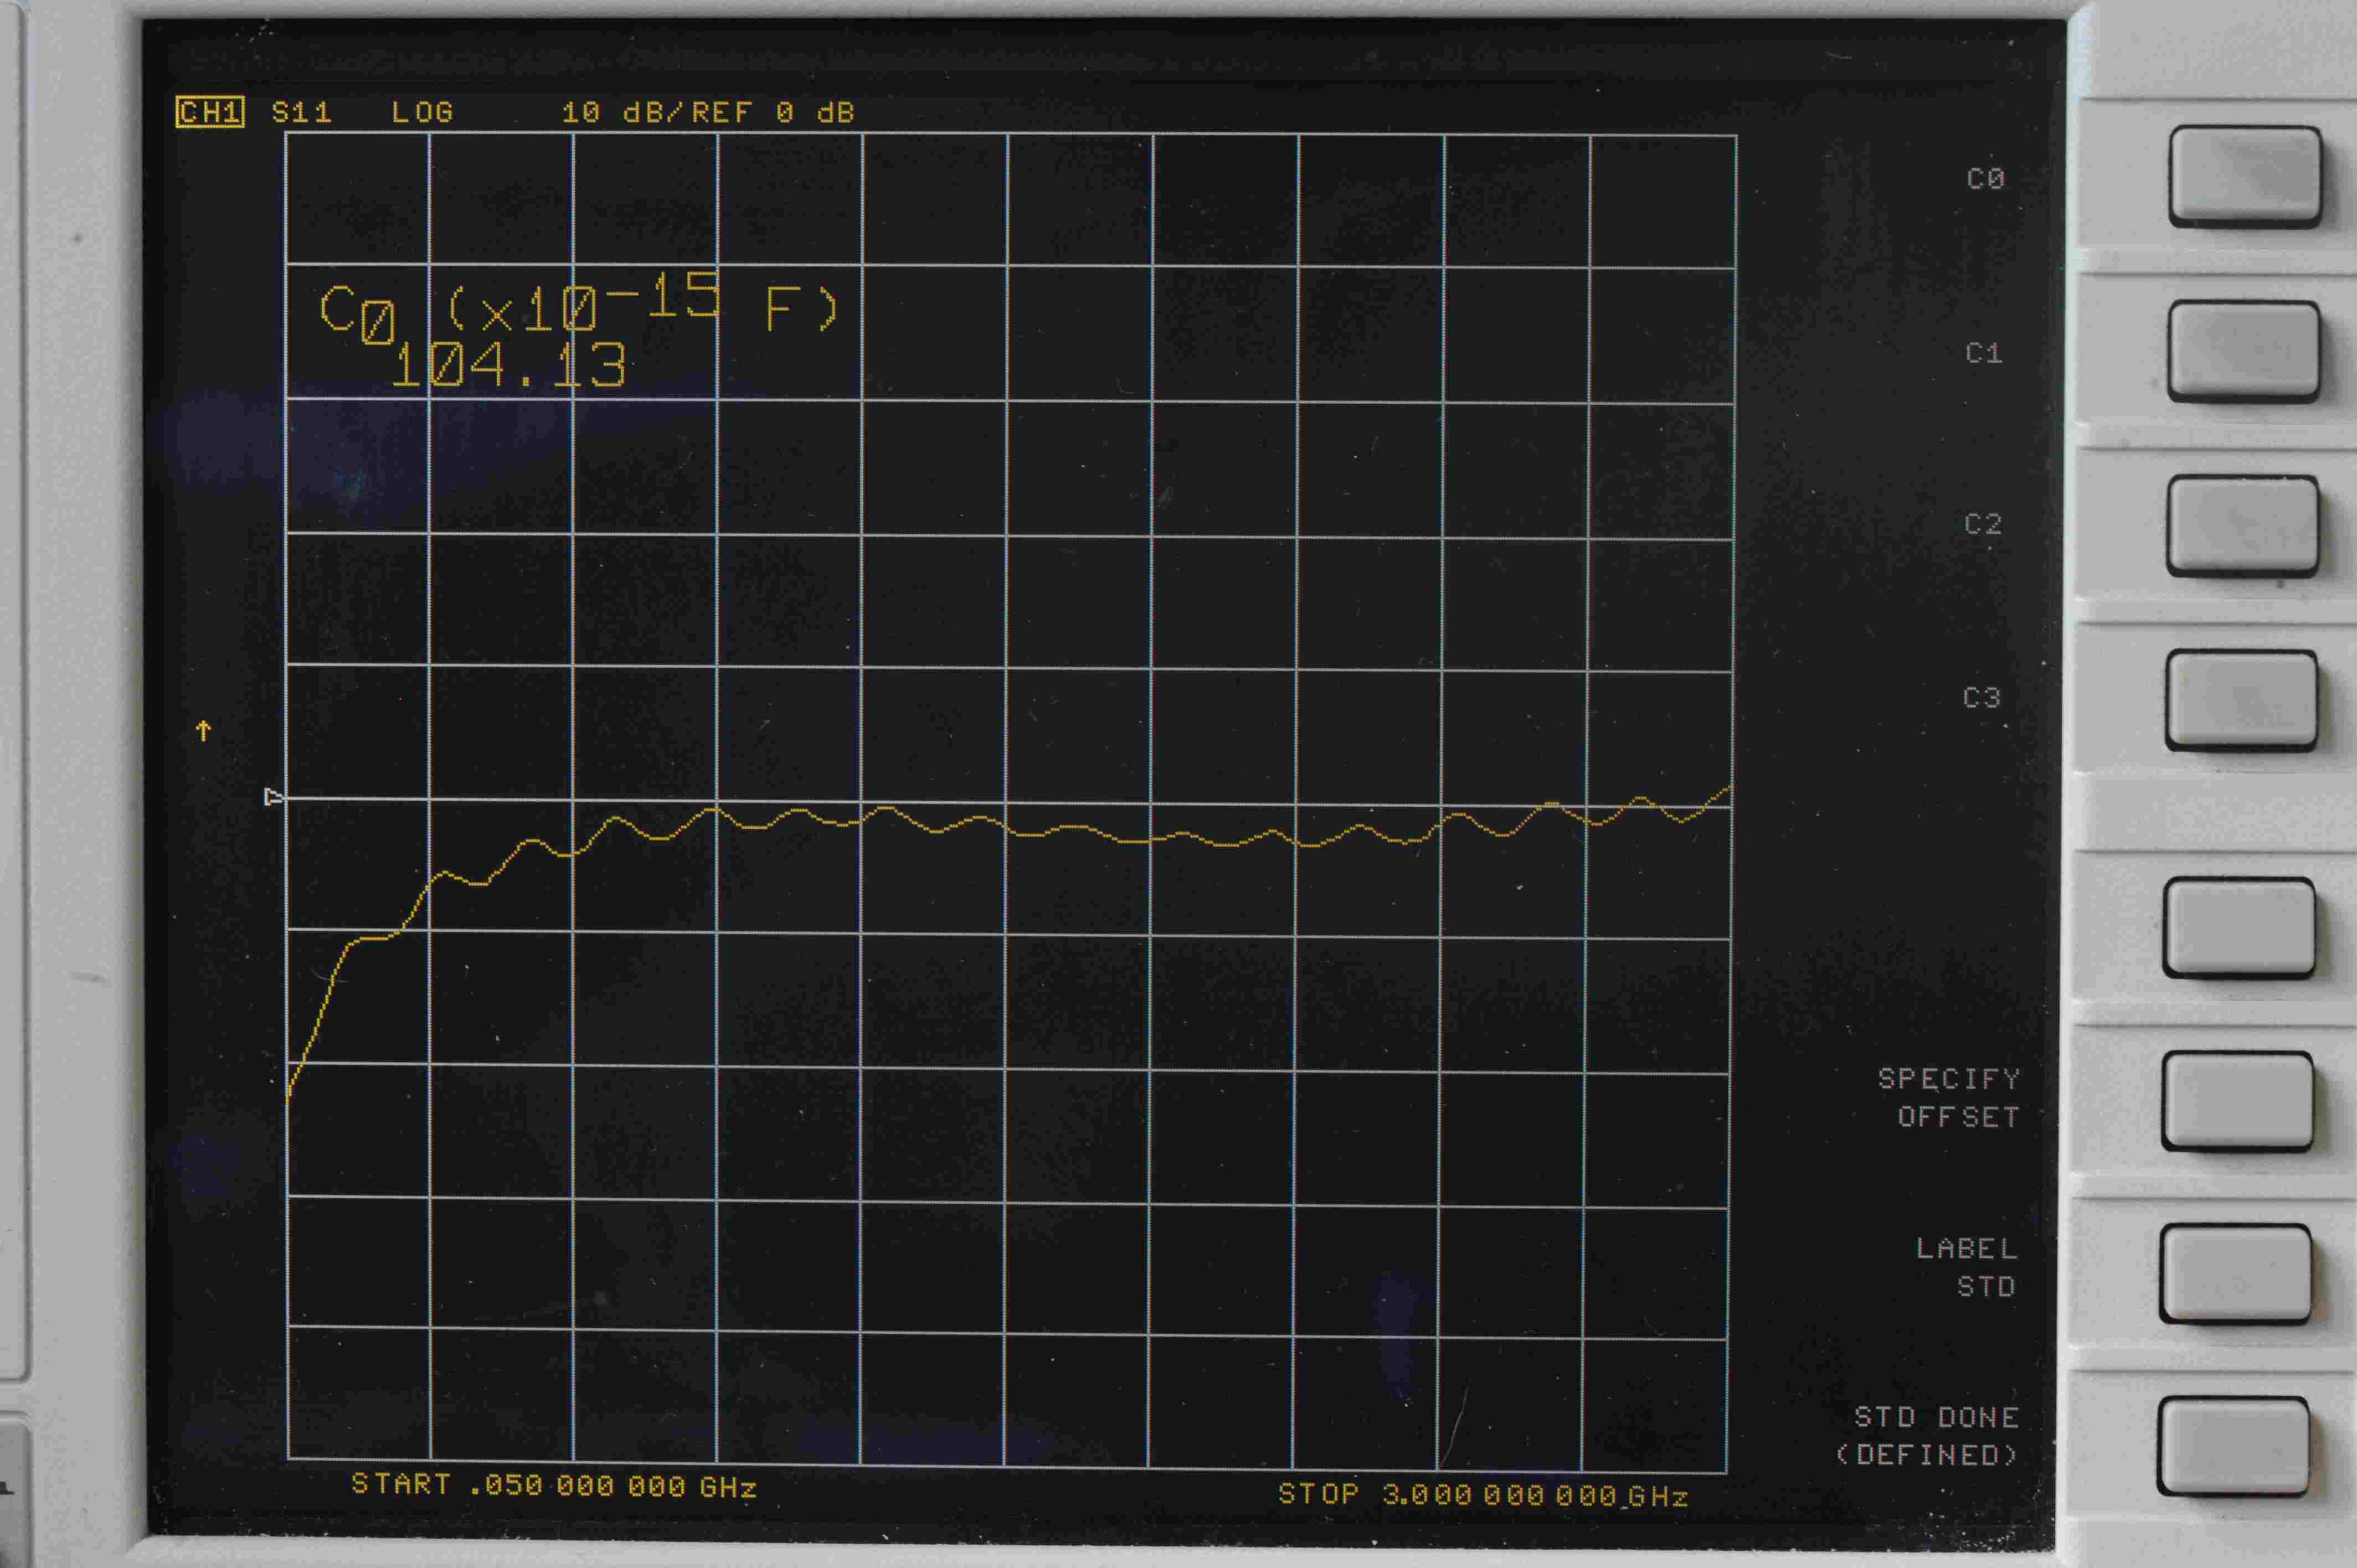 C0 has a value of 104.13 for the Keysight 85054 vector network analyzer calibration kit.